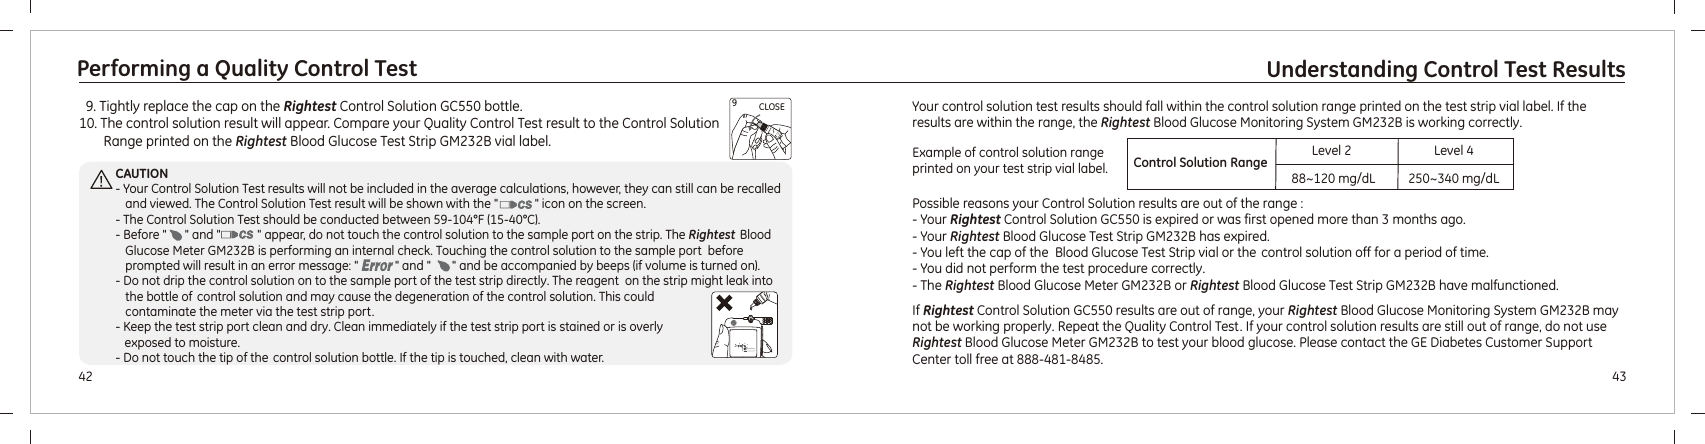   9. Tightly replace the cap on the   bottle.10. The control solution result will appear. Compare your Quality Control Test result to the Control Solution Range printed on the Rightest Blood Glucose Test Strip   vial label.Rightest Control Solution GC550GM232BIf Rightest Control Solution GC550 results are out of range, your Rightest Blood Glucose Monitoring System GM232B may not be working properly. Repeat the Quality Control Test. If your control solution results are still out of range, do not use      Rightest Blood Glucose Meter  to test your blood glucose. Please contact the GE Diabetes Customer Support Center  .GM232B toll free at 888-481-848543Understanding Control Test Results42Performing a Quality Control TestCLOSE9CAUTION- Your Control Solution Test results will not be included in the average calculations, however, they can still can be recalled and viewed. The Control Solution Test result will be shown with the &quot;            &quot; icon on the screen.- The Control Solution Test should be conducted between 59-104°F (15-40°C). - Before &quot;      &quot; and &quot;            &quot; appear, do not touch the control solution to the sample port on the strip. The Rightest  Blood Glucose Meter  is performing an internal check. Touching the control solution to the sample port  before prompted will result in an error message: &quot;            &quot; and &quot;       &quot;  .- Do not drip the control solution on to the sample port of the test strip directly. The reagent  on the strip might leak into  the bottle of control solution and may cause the degeneration of the control solution. This could contaminate the meter via the test strip port.- Keep the test strip port clean and dry. Clean immediately if the test strip port is stained or is overly    exposed to moisture. - Do not touch the tip of the control solution bottle. If the tip is touched, clean with water.GM232B and be accompanied by beeps (if volume is turned on)Your control solution test results should fall within the control solution range printed on the test strip vial label. If the results are within the range, the Rightest Blood Glucose Monitoring System GM232B is working correctly.Possible reasons your Control Solution results are out of the range :- Your   is expired or was first opened more than 3 months ago.- Your Rightest Blood Glucose Test Strip   has expired.    - You left the cap of the  Blood Glucose Test Strip vial or the  control solution off for a period of time.- You did not perform the test procedure correctly. - The  Blood Glucose Meter  or  Blood Glucose Test Strip  have malfunctioned. Rightest Control Solution GC550 Rightest  RightestGM232BGM232B GM232B Example of control solution range printed on your test strip vial label. Control Solution Range88~120 mg/dL 250~340 mg/dLLevel 2 Level 4